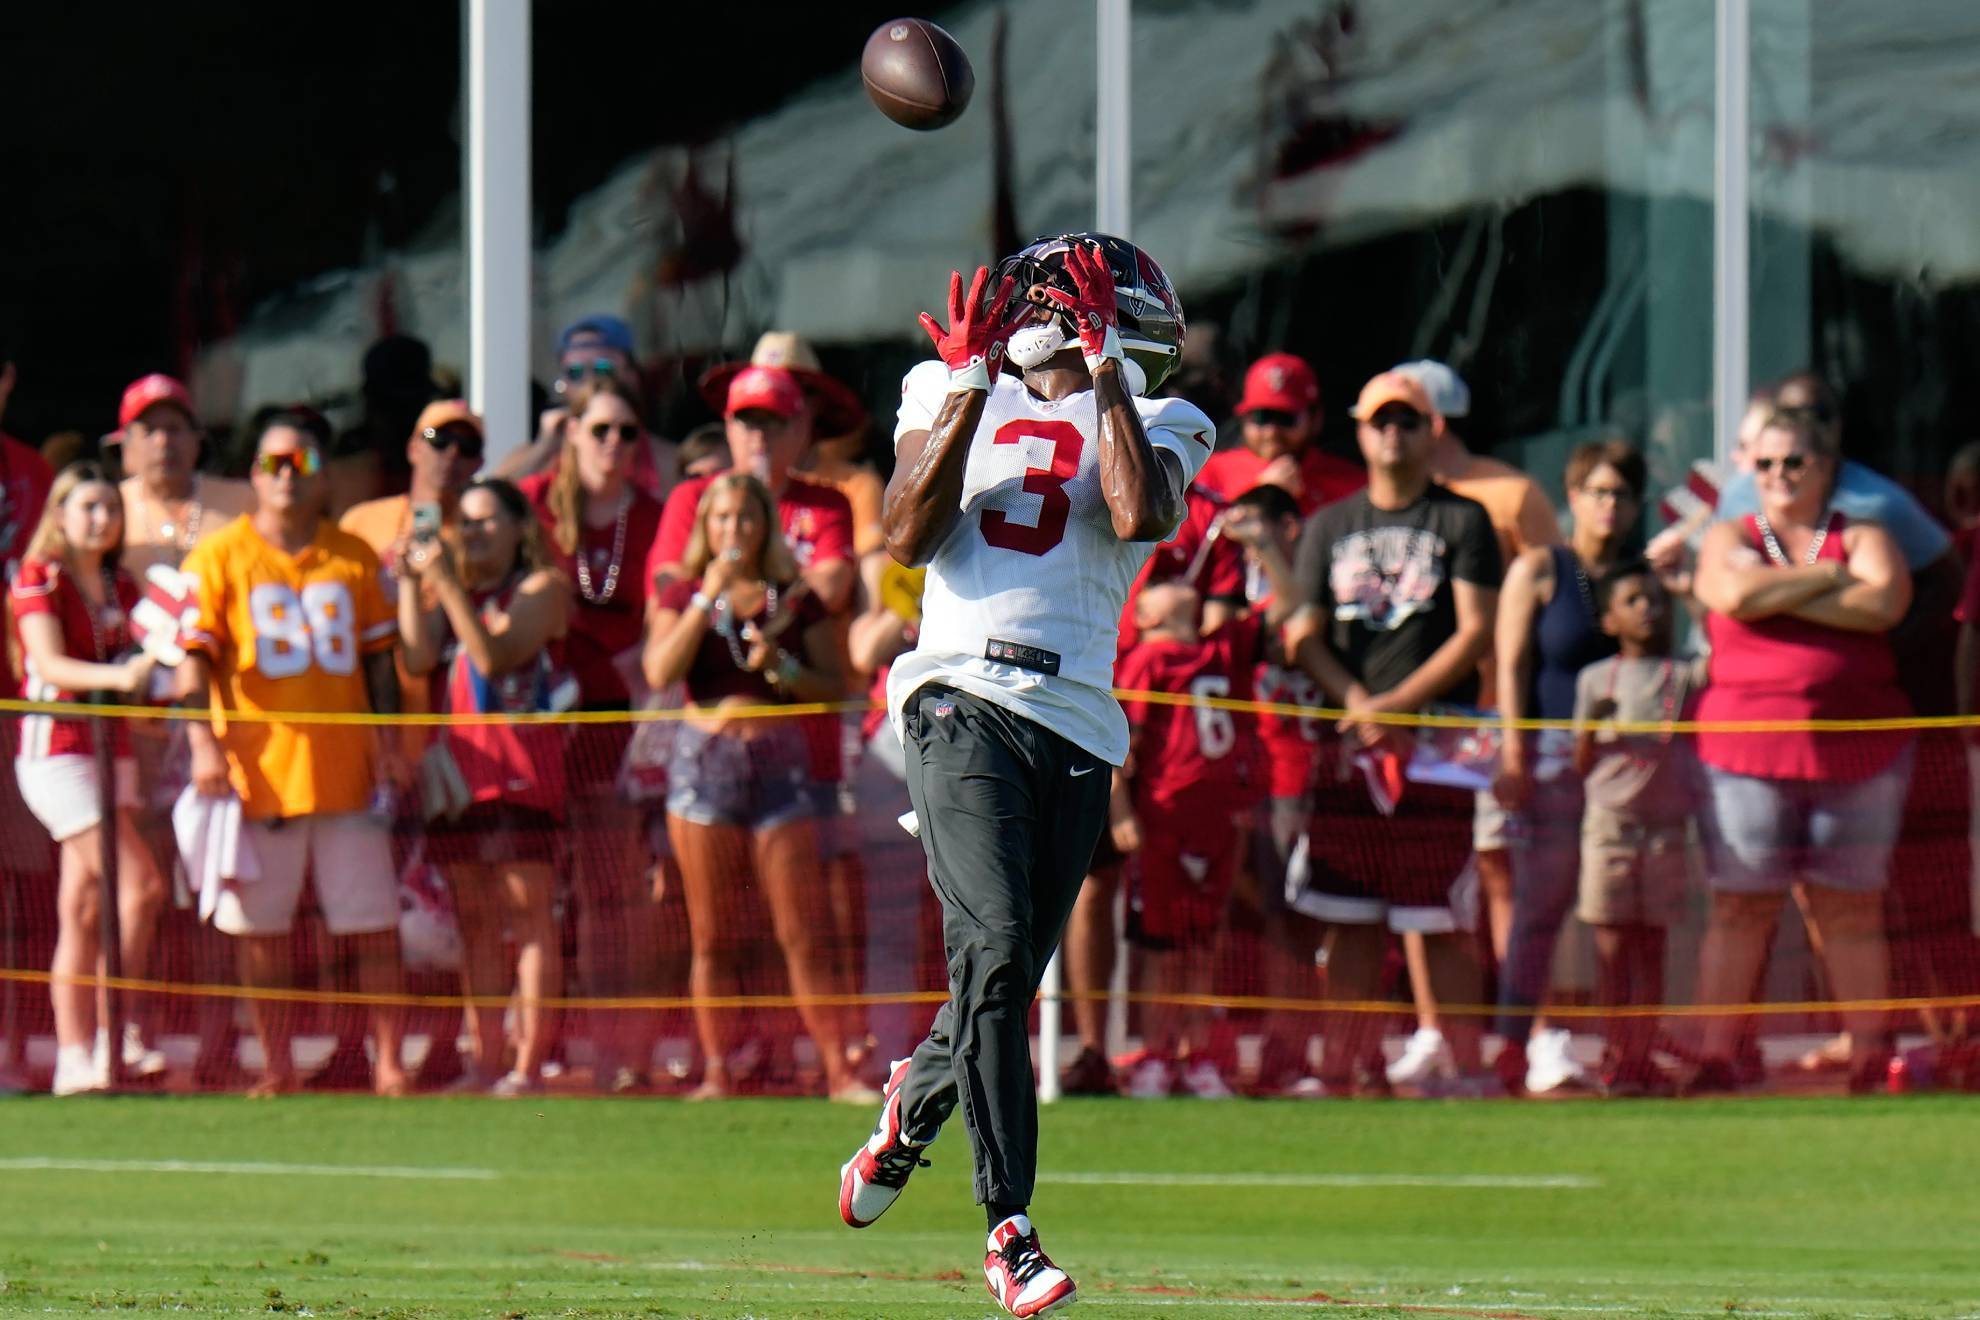 Tampa Bay Buccaneers wide receiver Russell Gage makes a catch